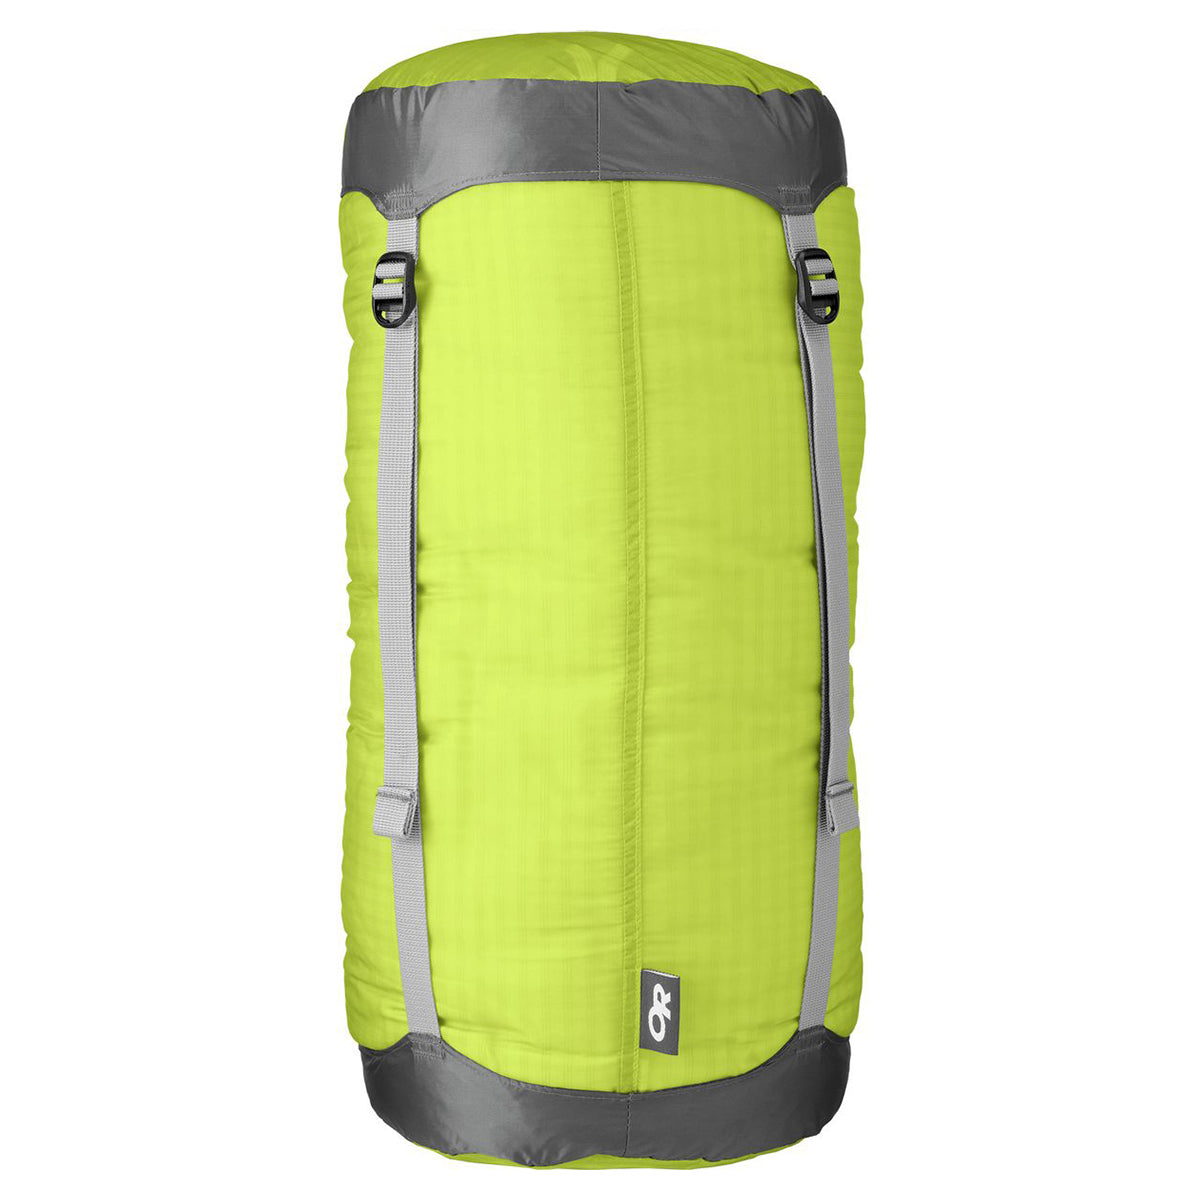 Outdoor Research Ultralight Compression Sack in Outdoor Research Ultralight Compression Sack - goHUNT Shop by GOHUNT | Outdoor Research - GOHUNT Shop